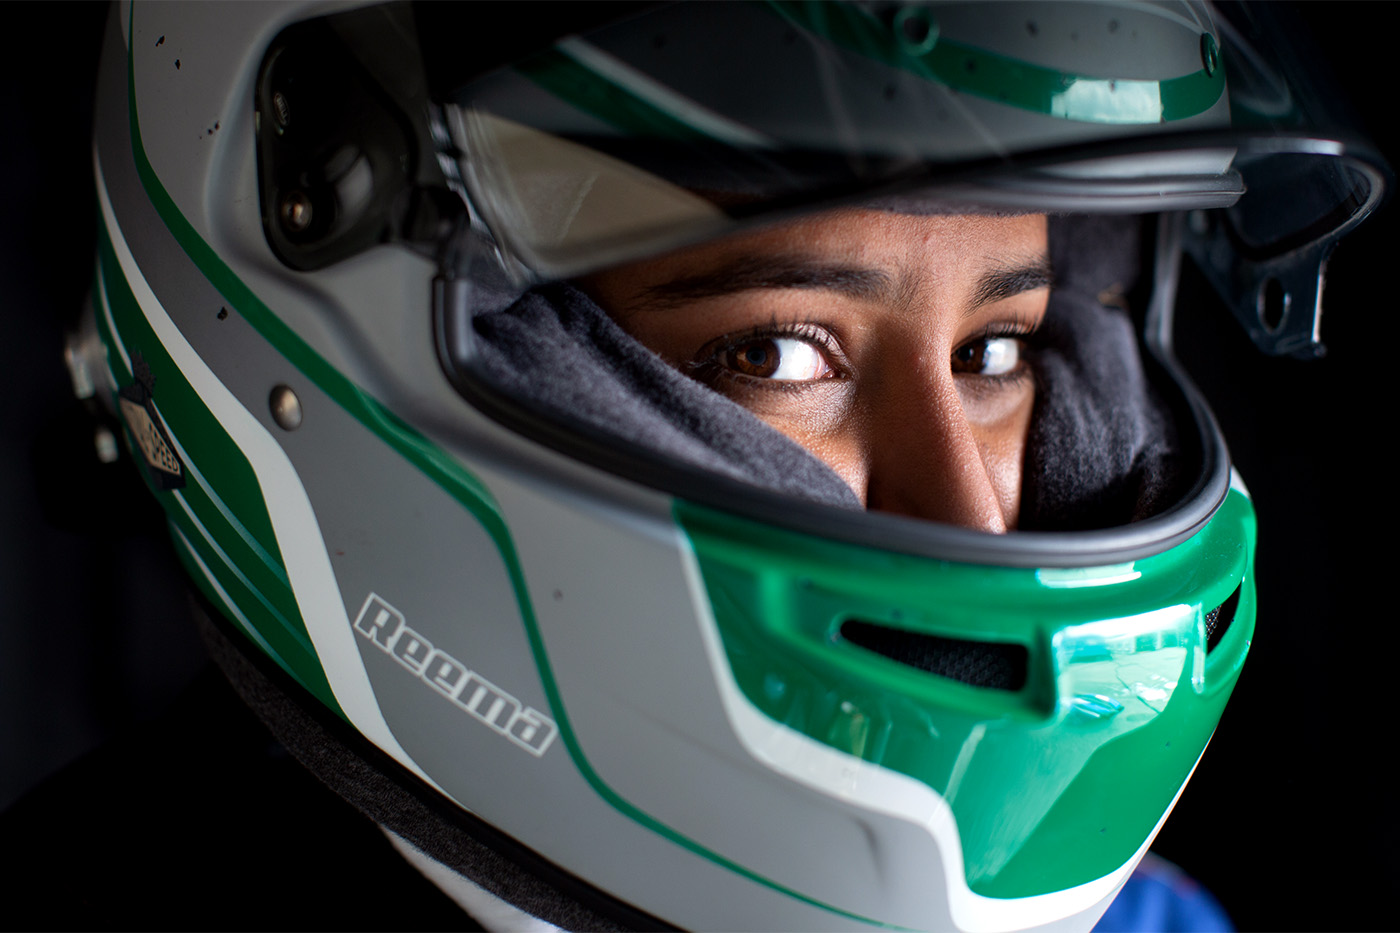 In Saudi Arabia, women couldn’t drive cars until last year. This Saudi woman races in one. 